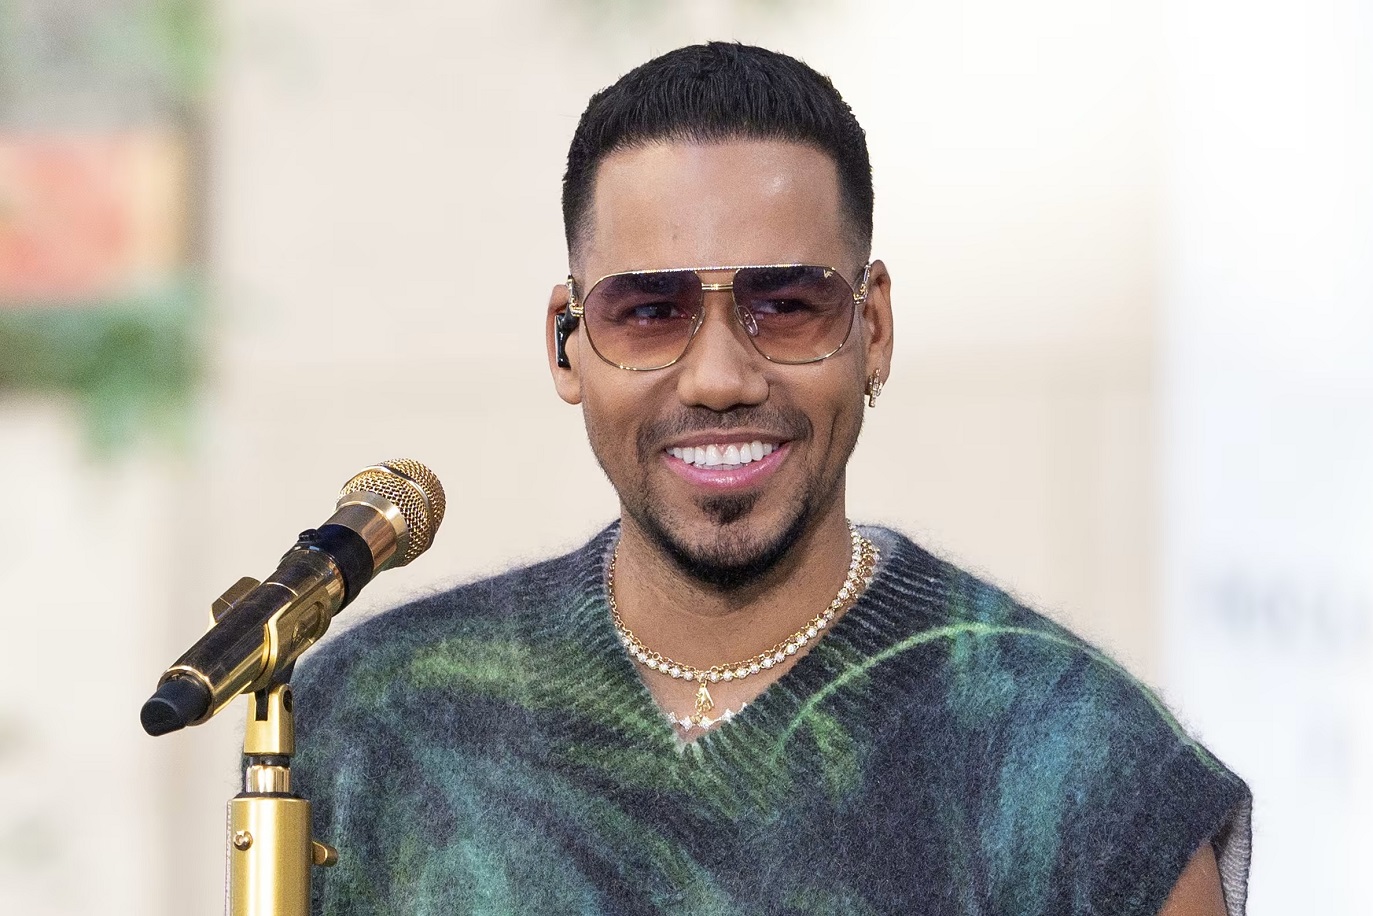 Romeo Santos became this Friday the first international artist to sell out three concerts at the Wizink Center in Madrid, Spain, in just 24 hours.